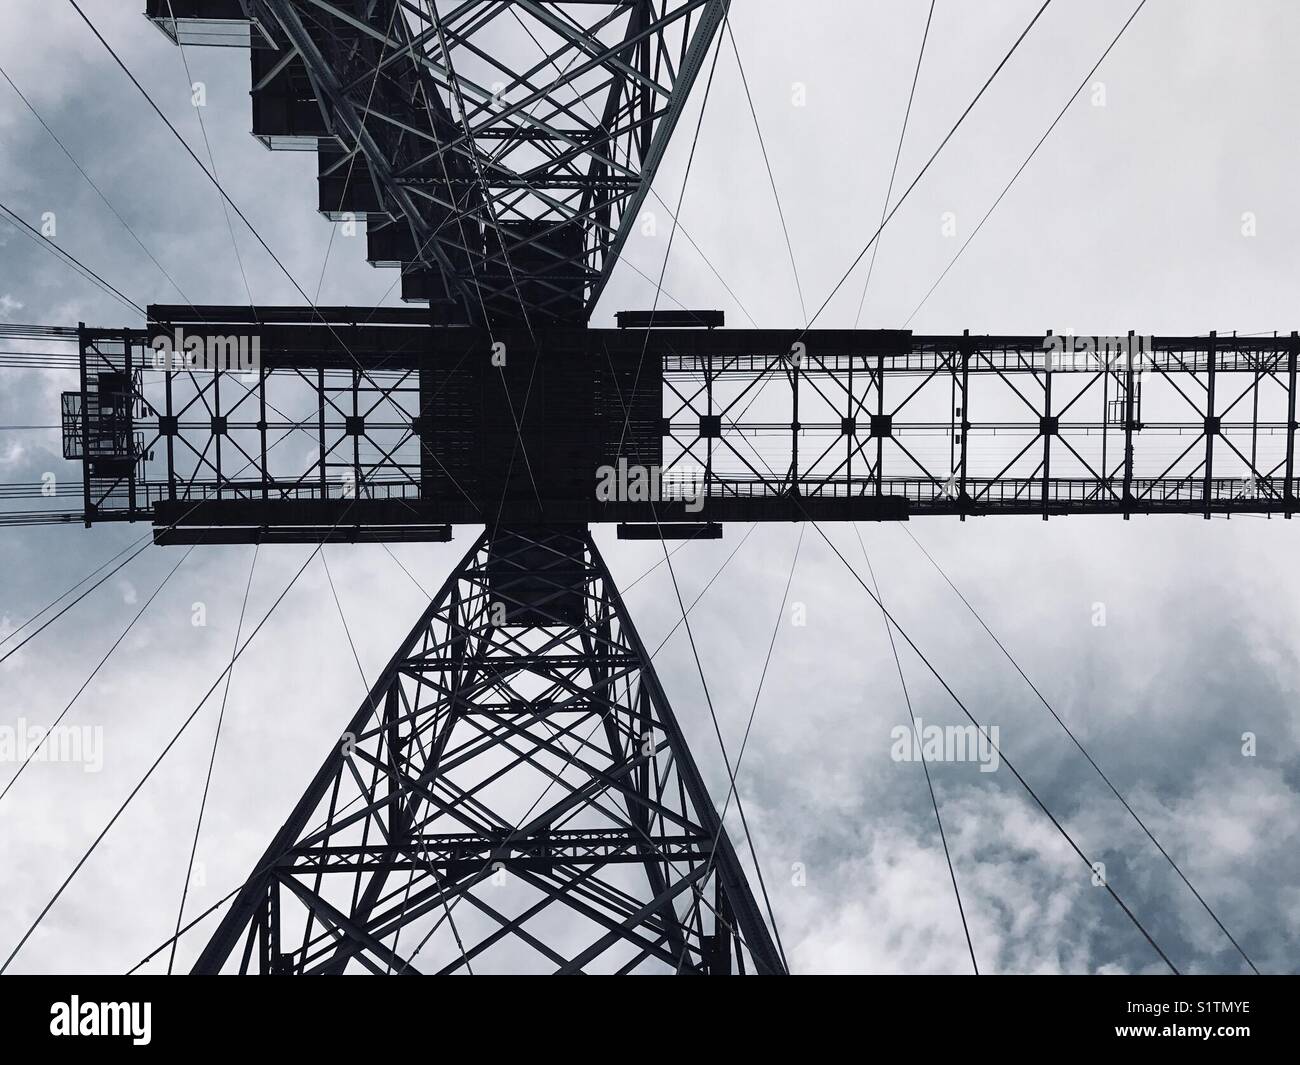 Newport, Wales: View looking up at the huge steel supporting structure of the historic Transporter Bridge Stock Photo